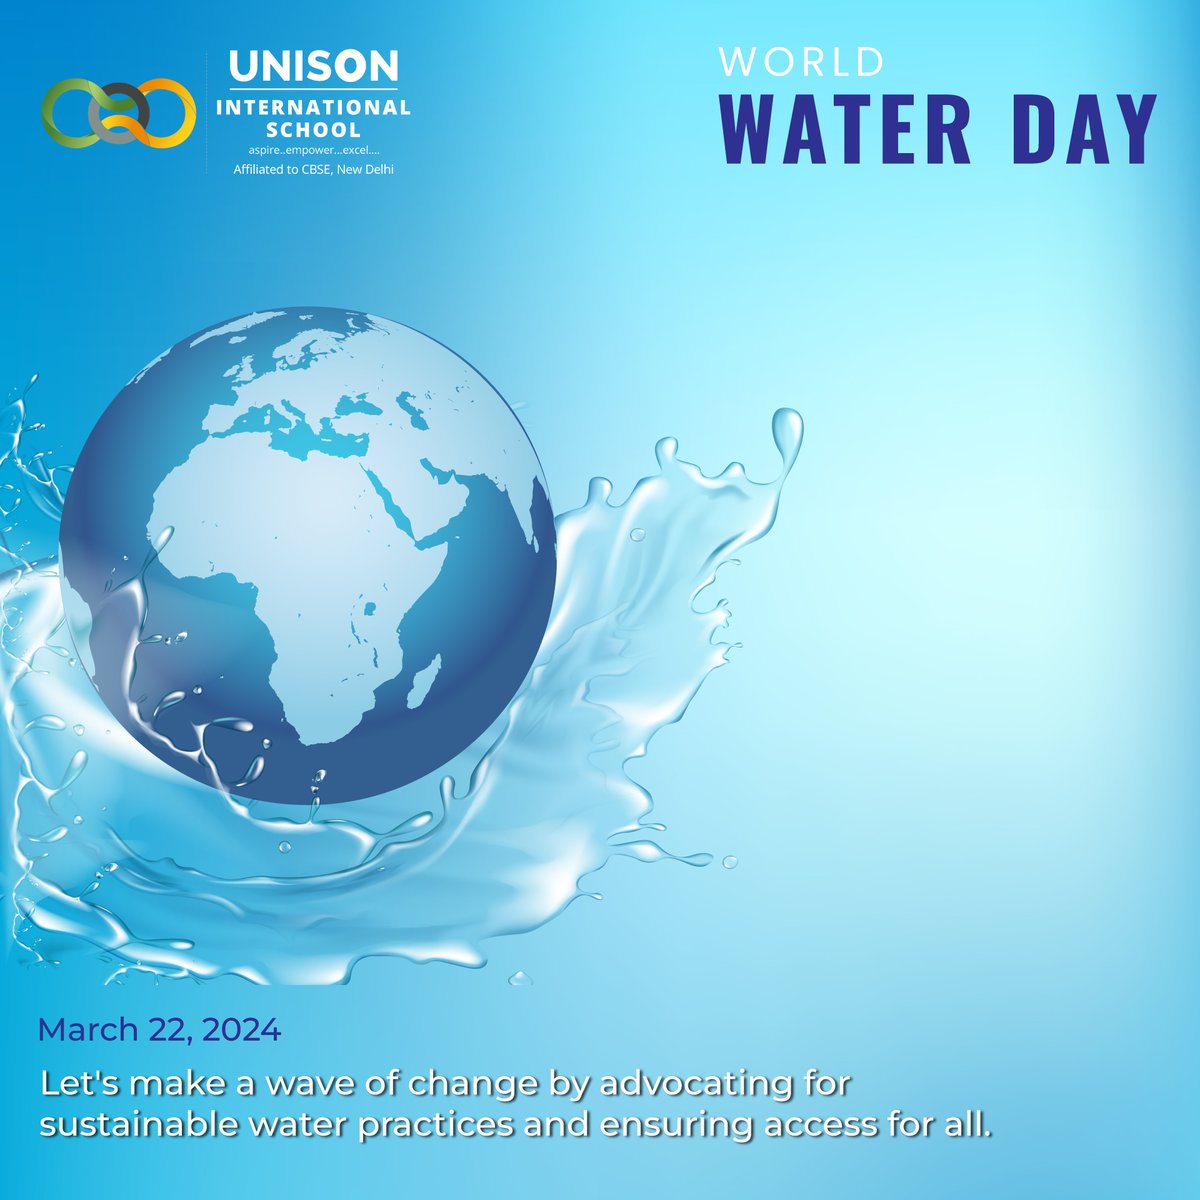 On World Water Day, let's educate and raise awareness about protecting water sources for future generations💧🌟

#WorldWaterDay #UnisonInternationalSchool #Excellence #Academics #ExtracurricularActivities #FutureLeaders #CBSESchool #Digitalseries